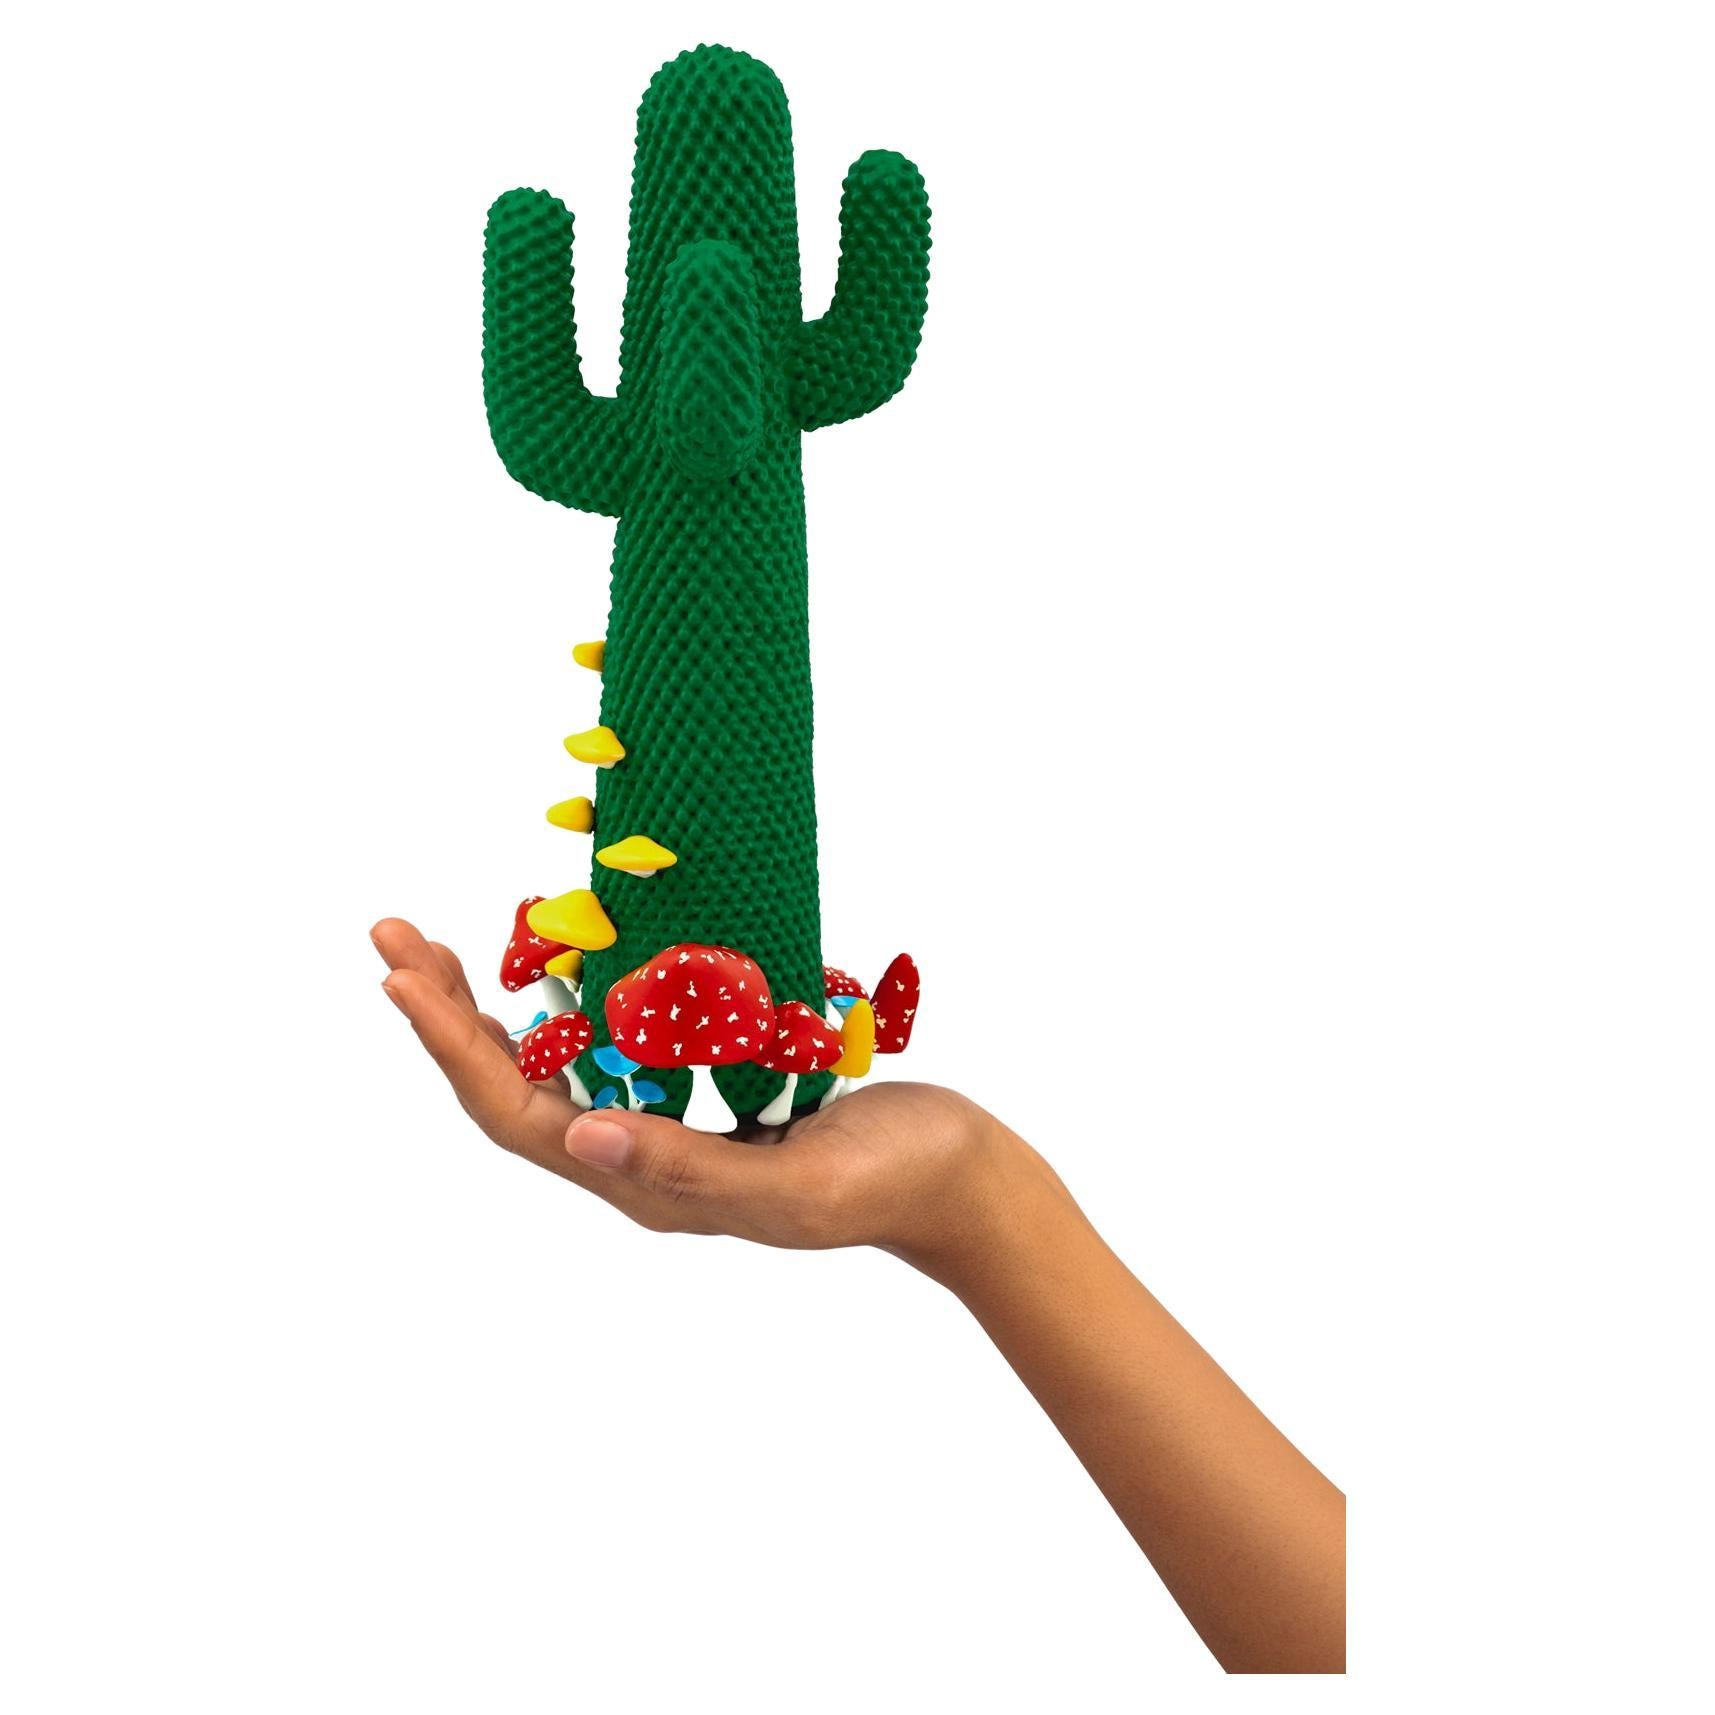 LIMITED EDITION #28/99

Gufram presents the miniaturised version of the Shroom CACTUS® created in collaboration with A$AP Rocky and the artist’s new design studio HOMMEMADE Exactly as the real-size Shroom CACTUS®, the new Guframini piece features